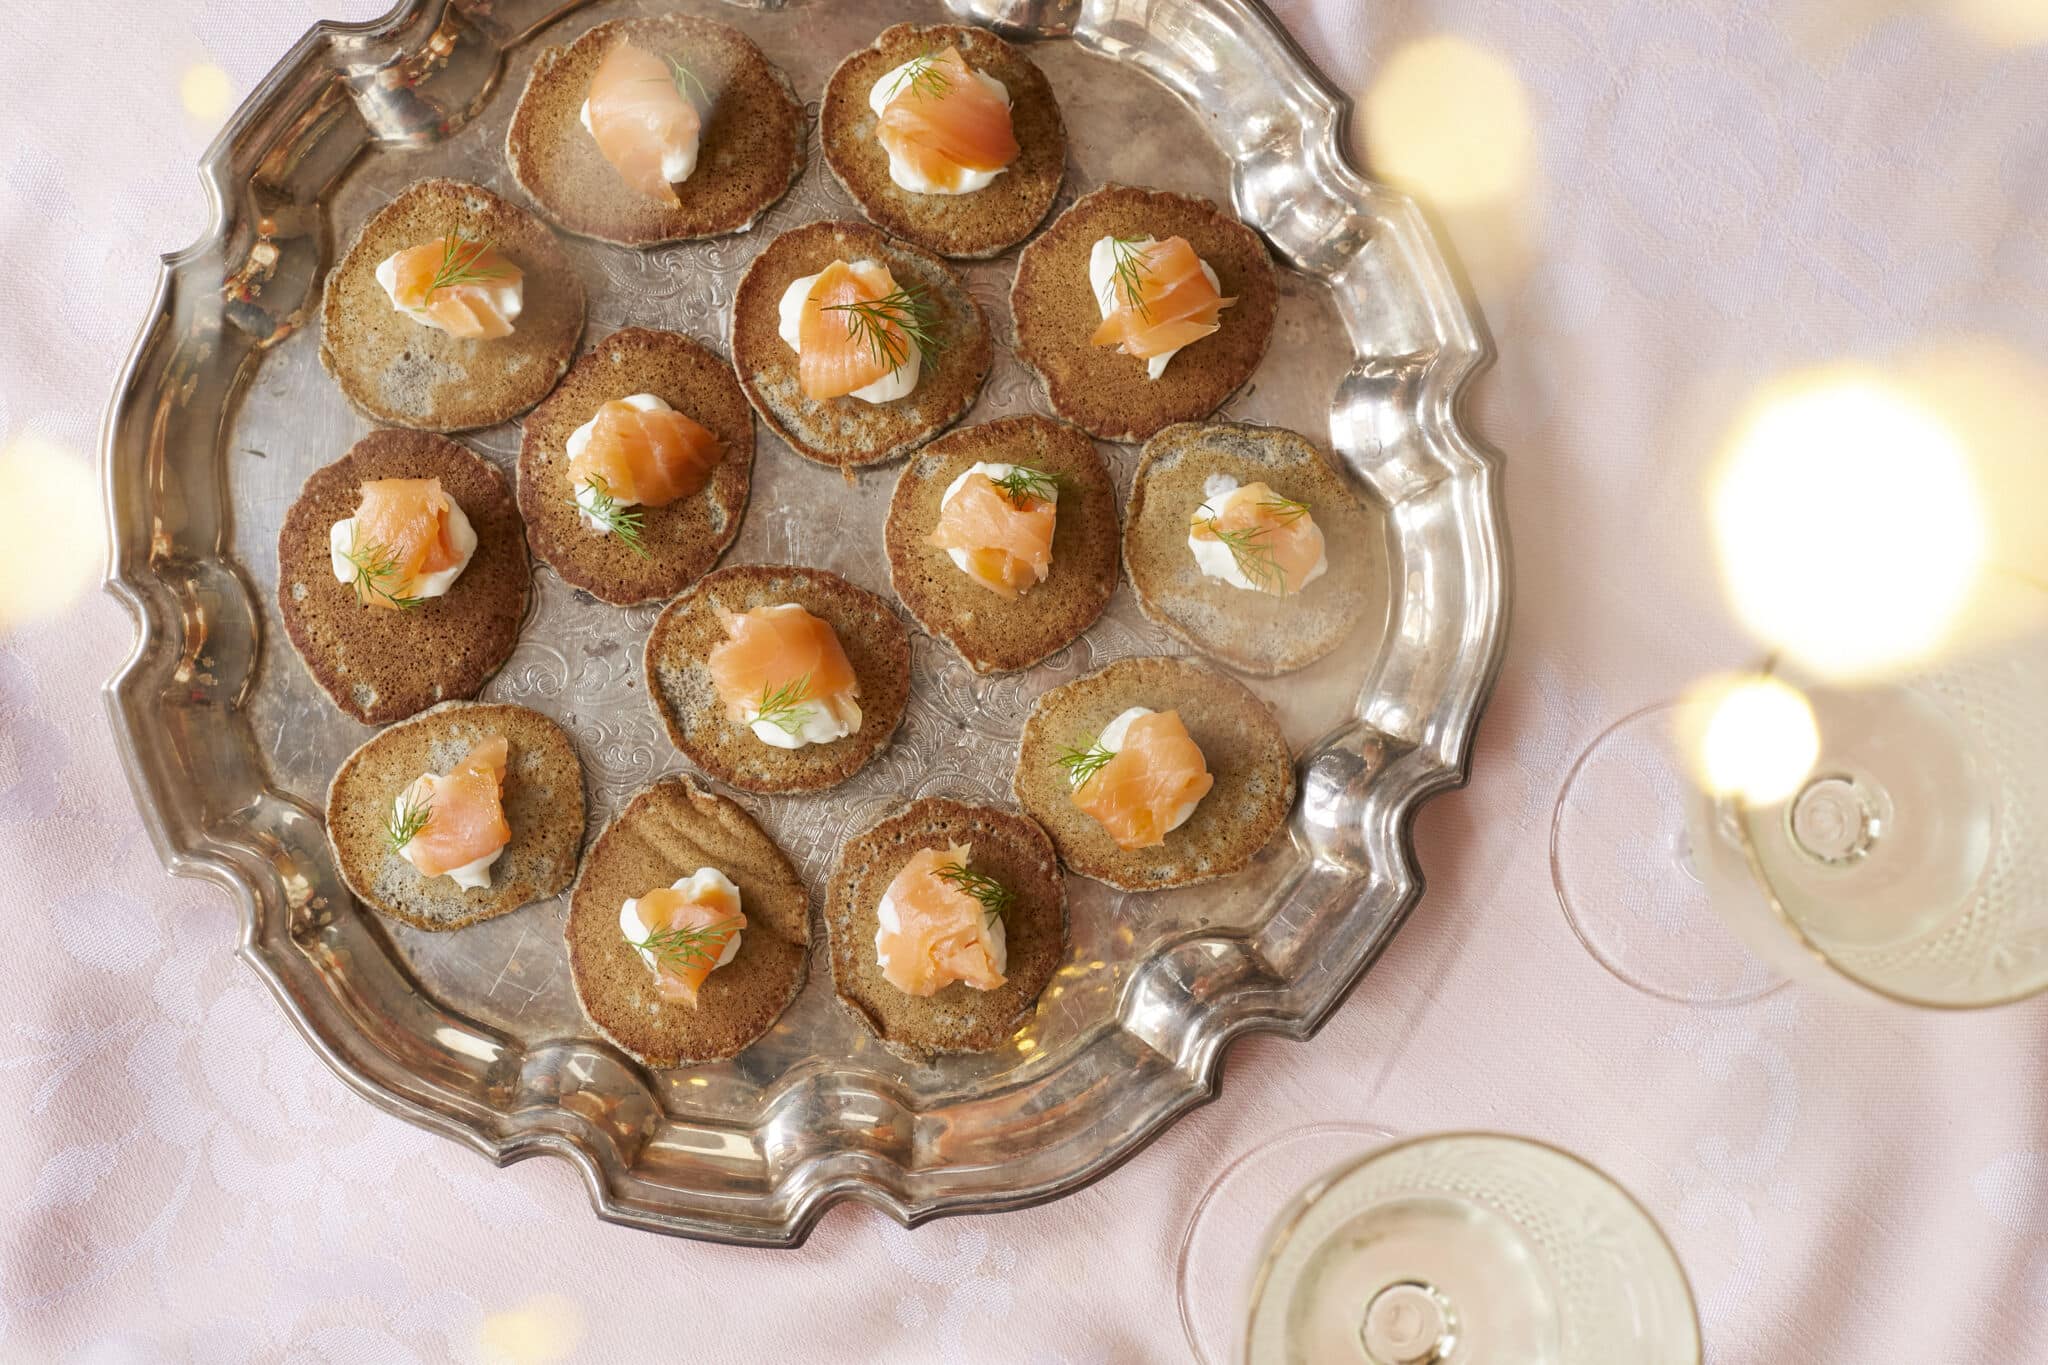 Small buckwheat pancakes, are fried and topped with crème fraîche and smoked salmon, served on a big silver platter.